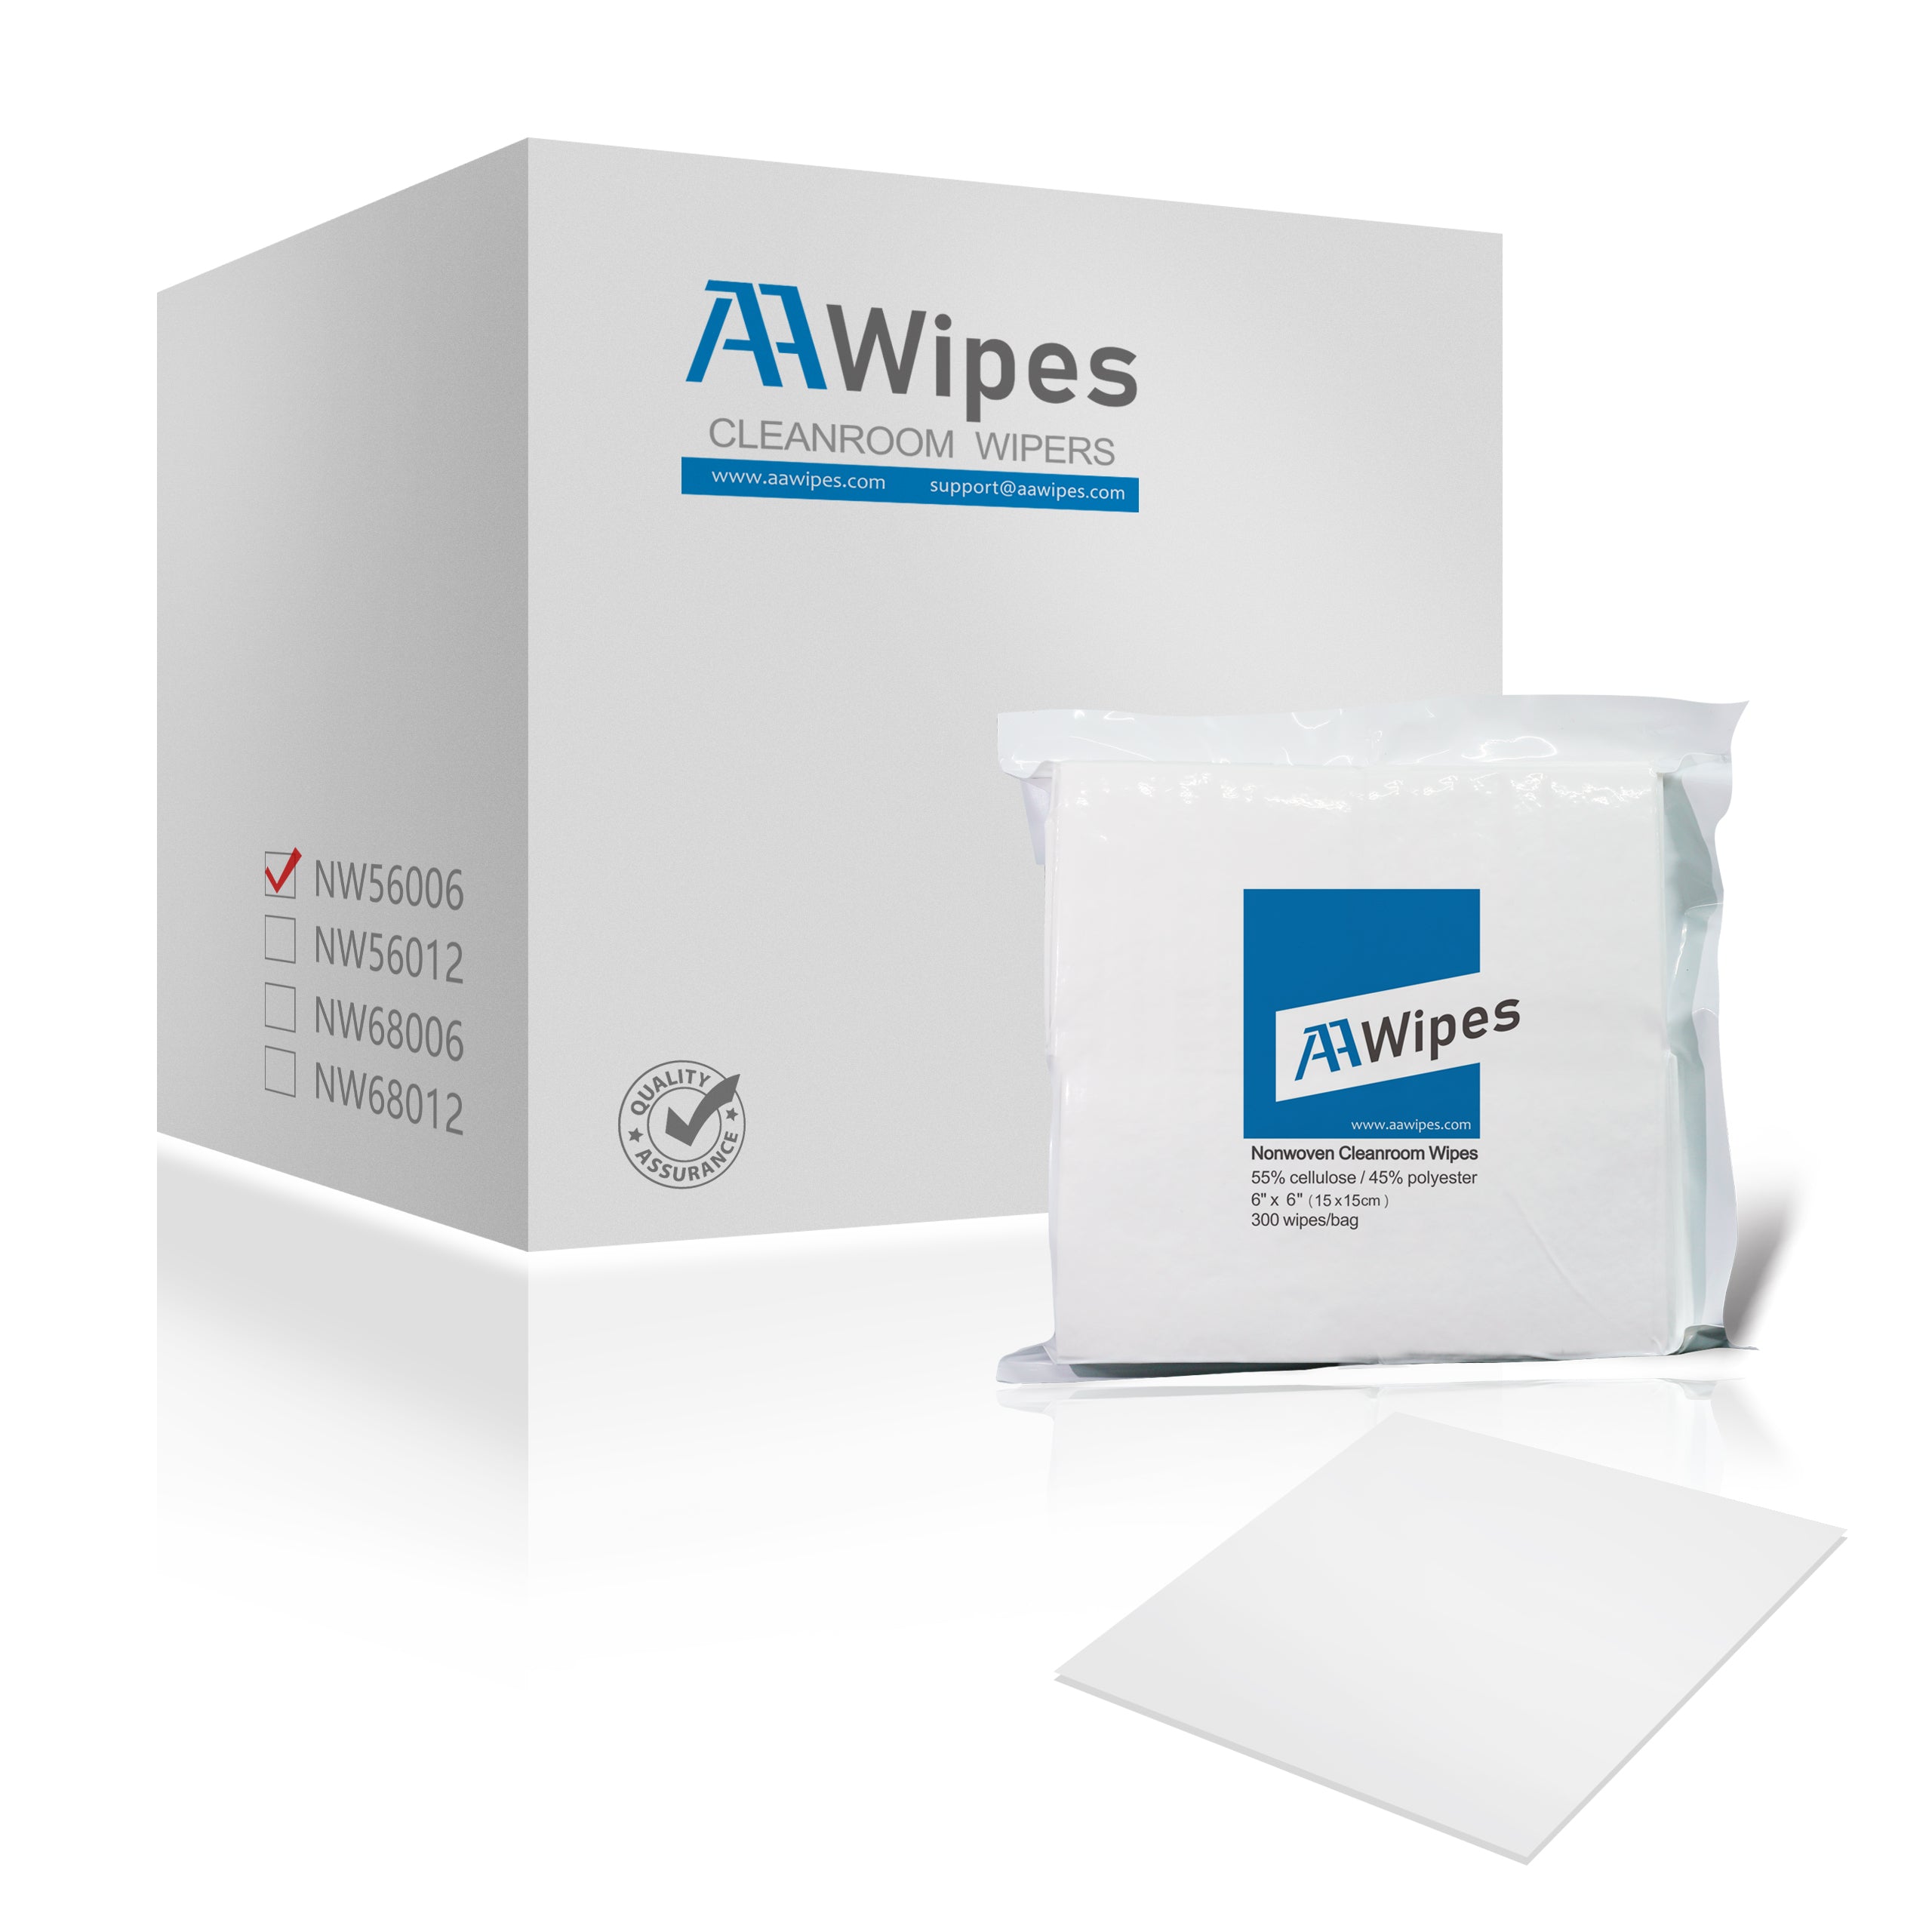 Cleanroom Wipes Cellulose/Polyester, Lint-free 6" x 6" Nonwoven Wipers (30,000 Wipes/100 Bags/Case) (56 gsm) (No. NW05606)